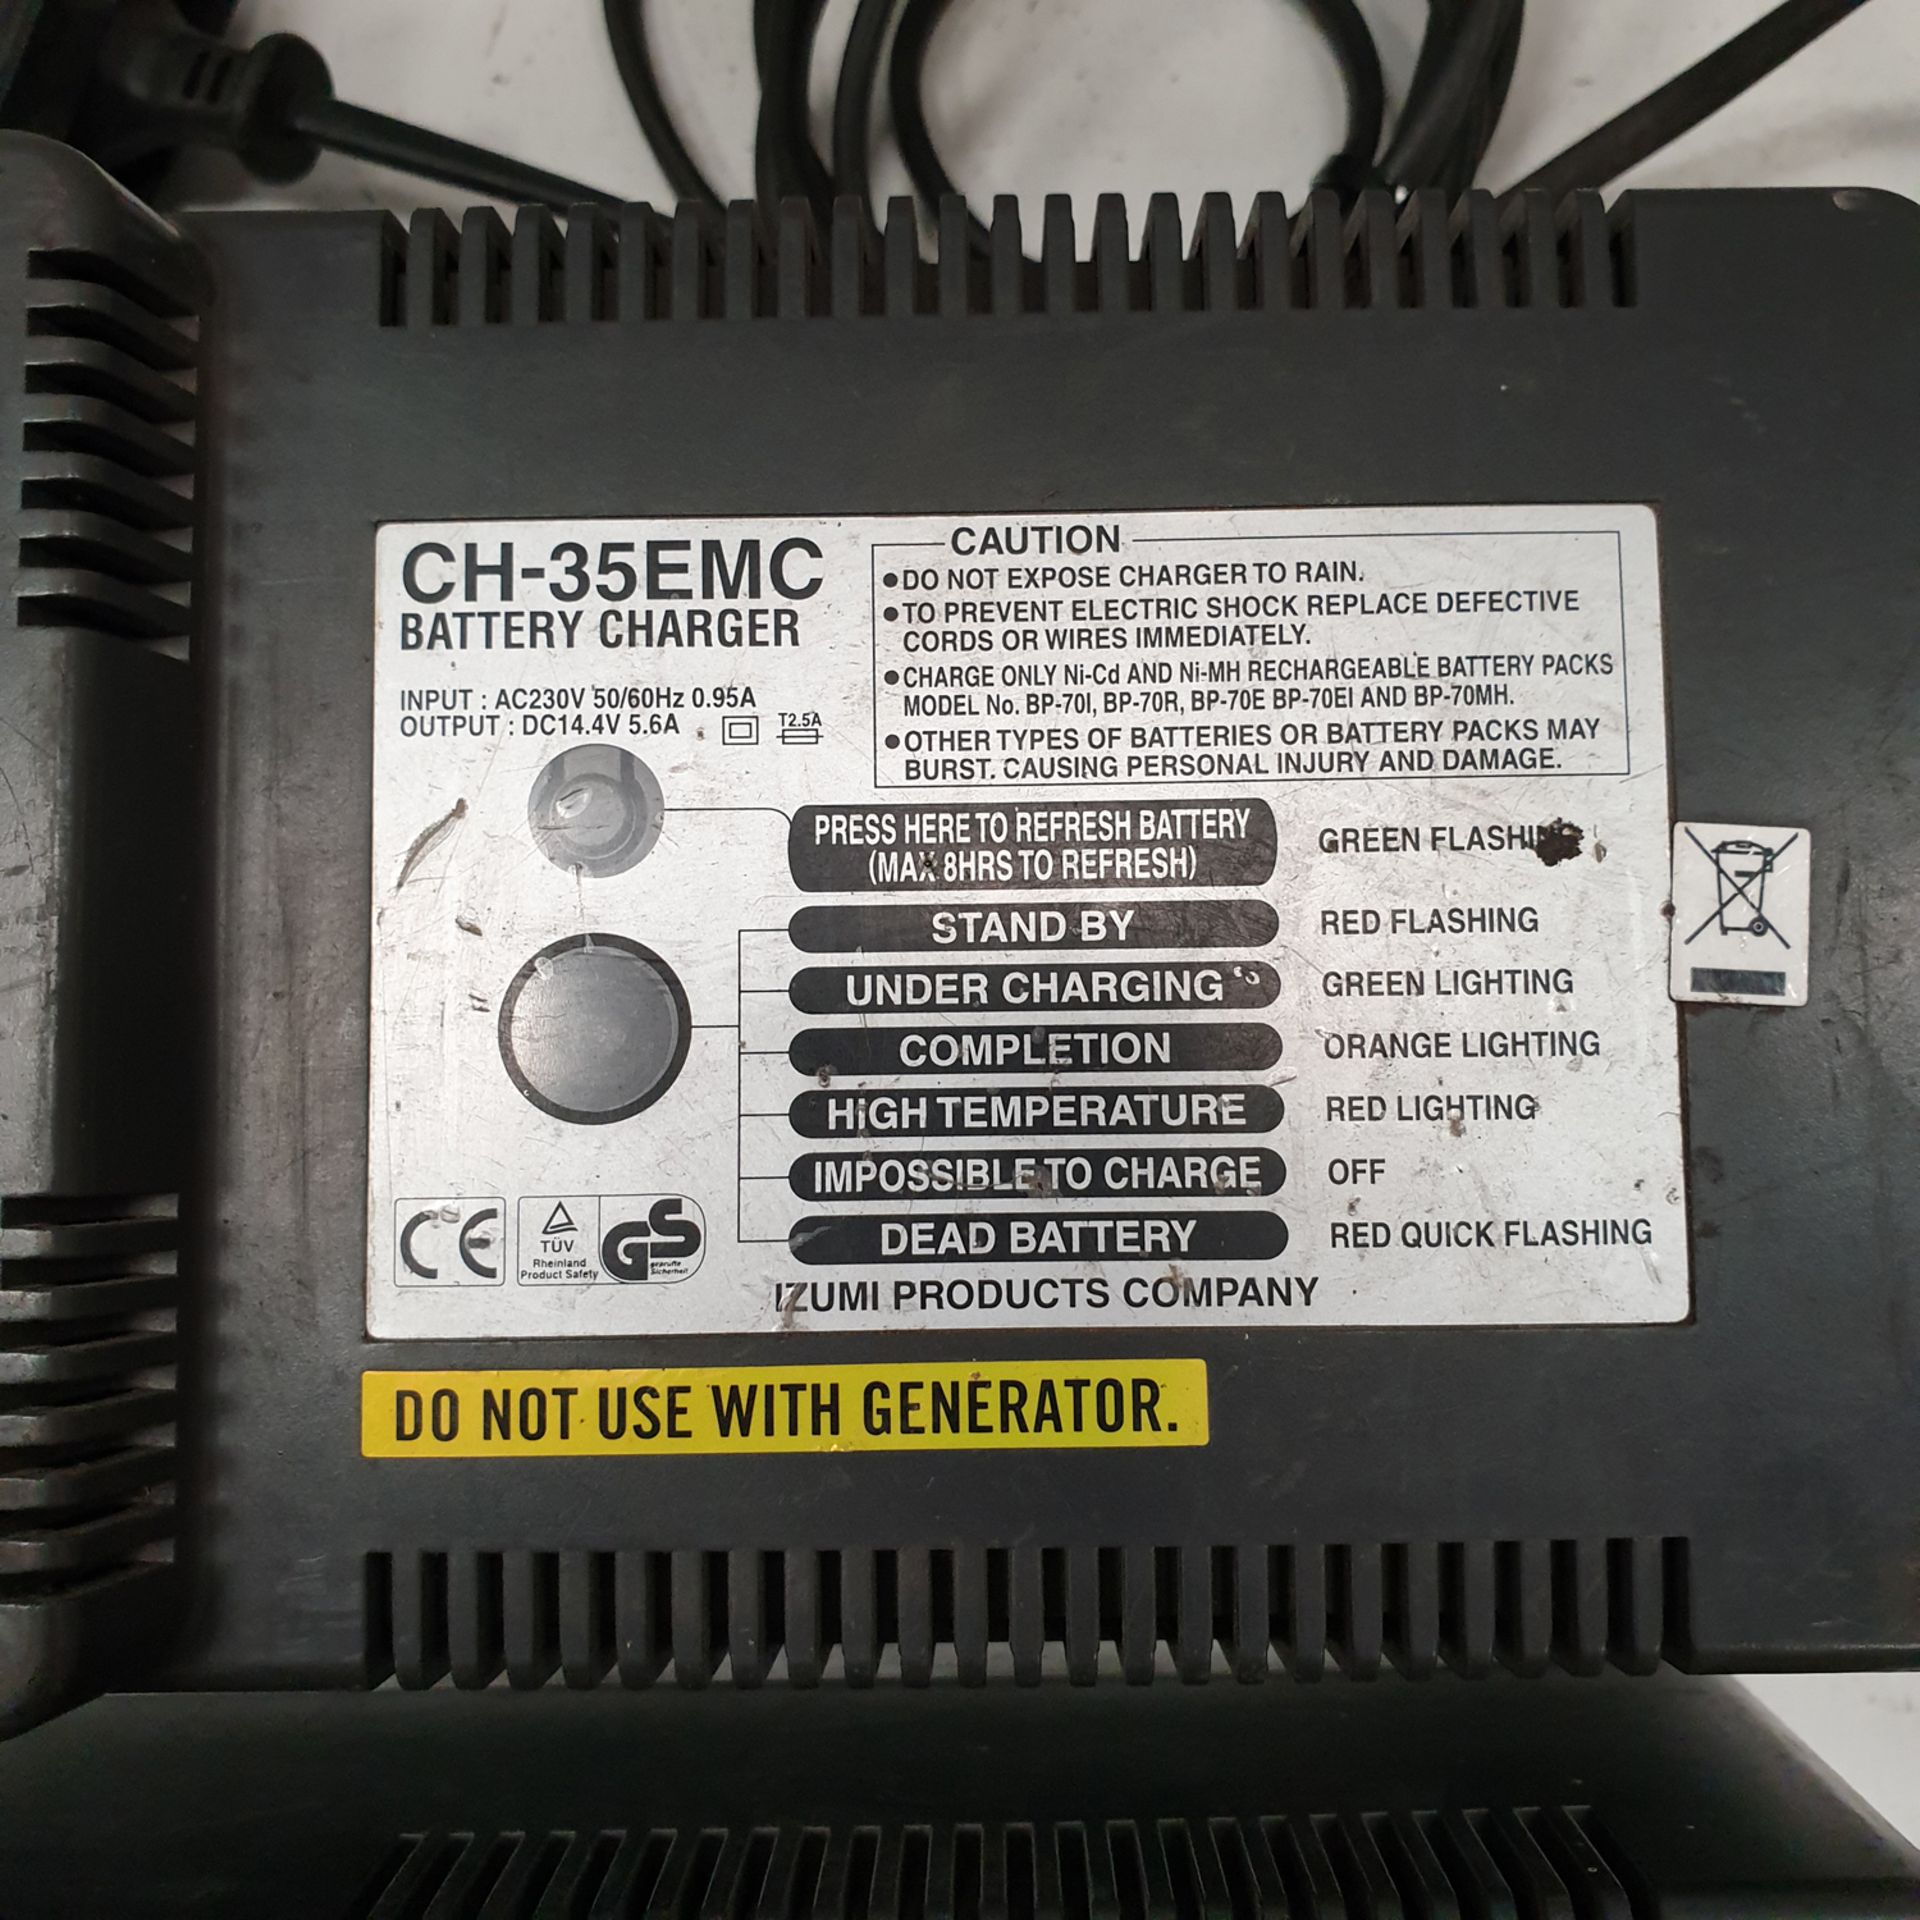 2 x CH-35EMC Battery Chargers. 230 Volts. - Image 3 of 3